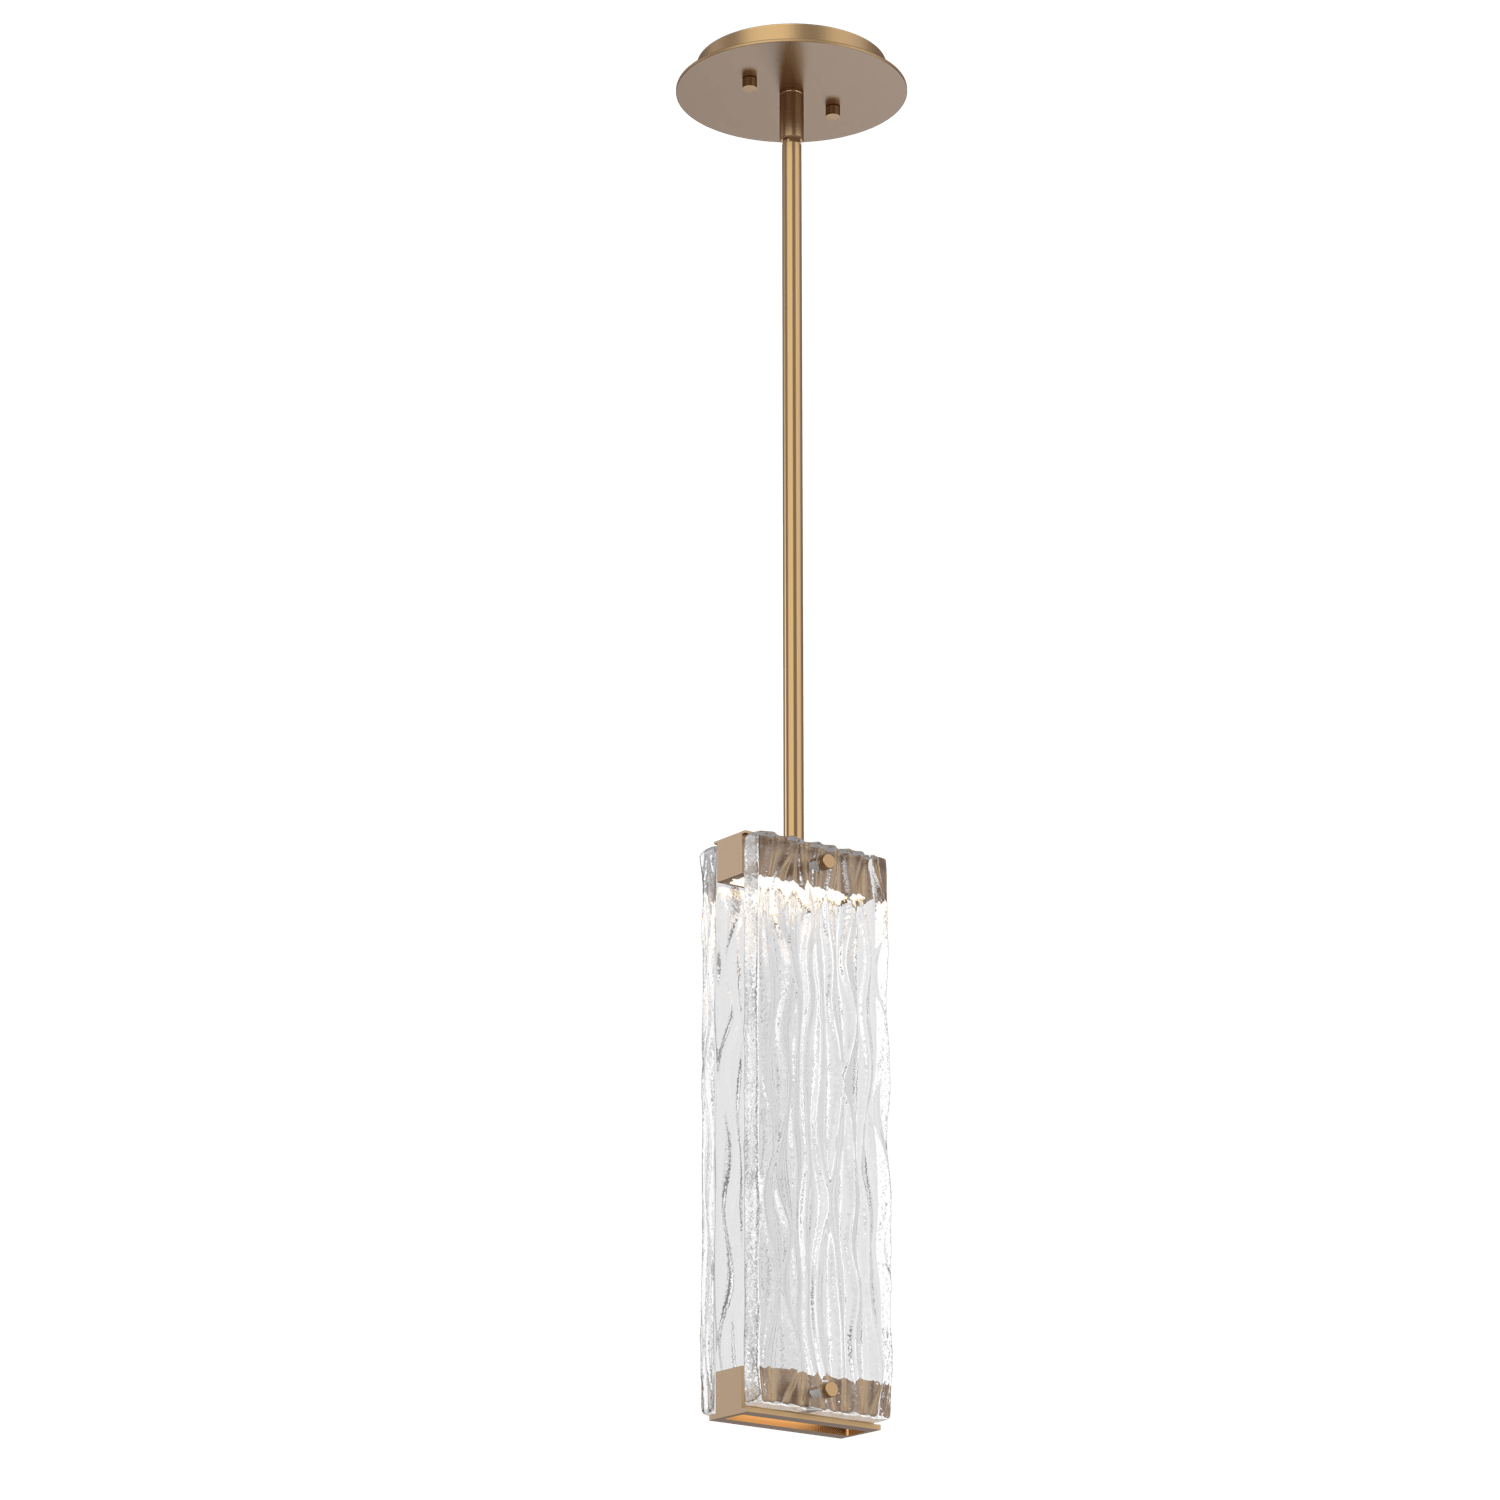 LAB0090-01-NB-TT-Hammerton-Studio-Tabulo-pendant-light-with-novel-brass-finish-and-clear-tidal-cast-glass-shade-and-LED-lamping